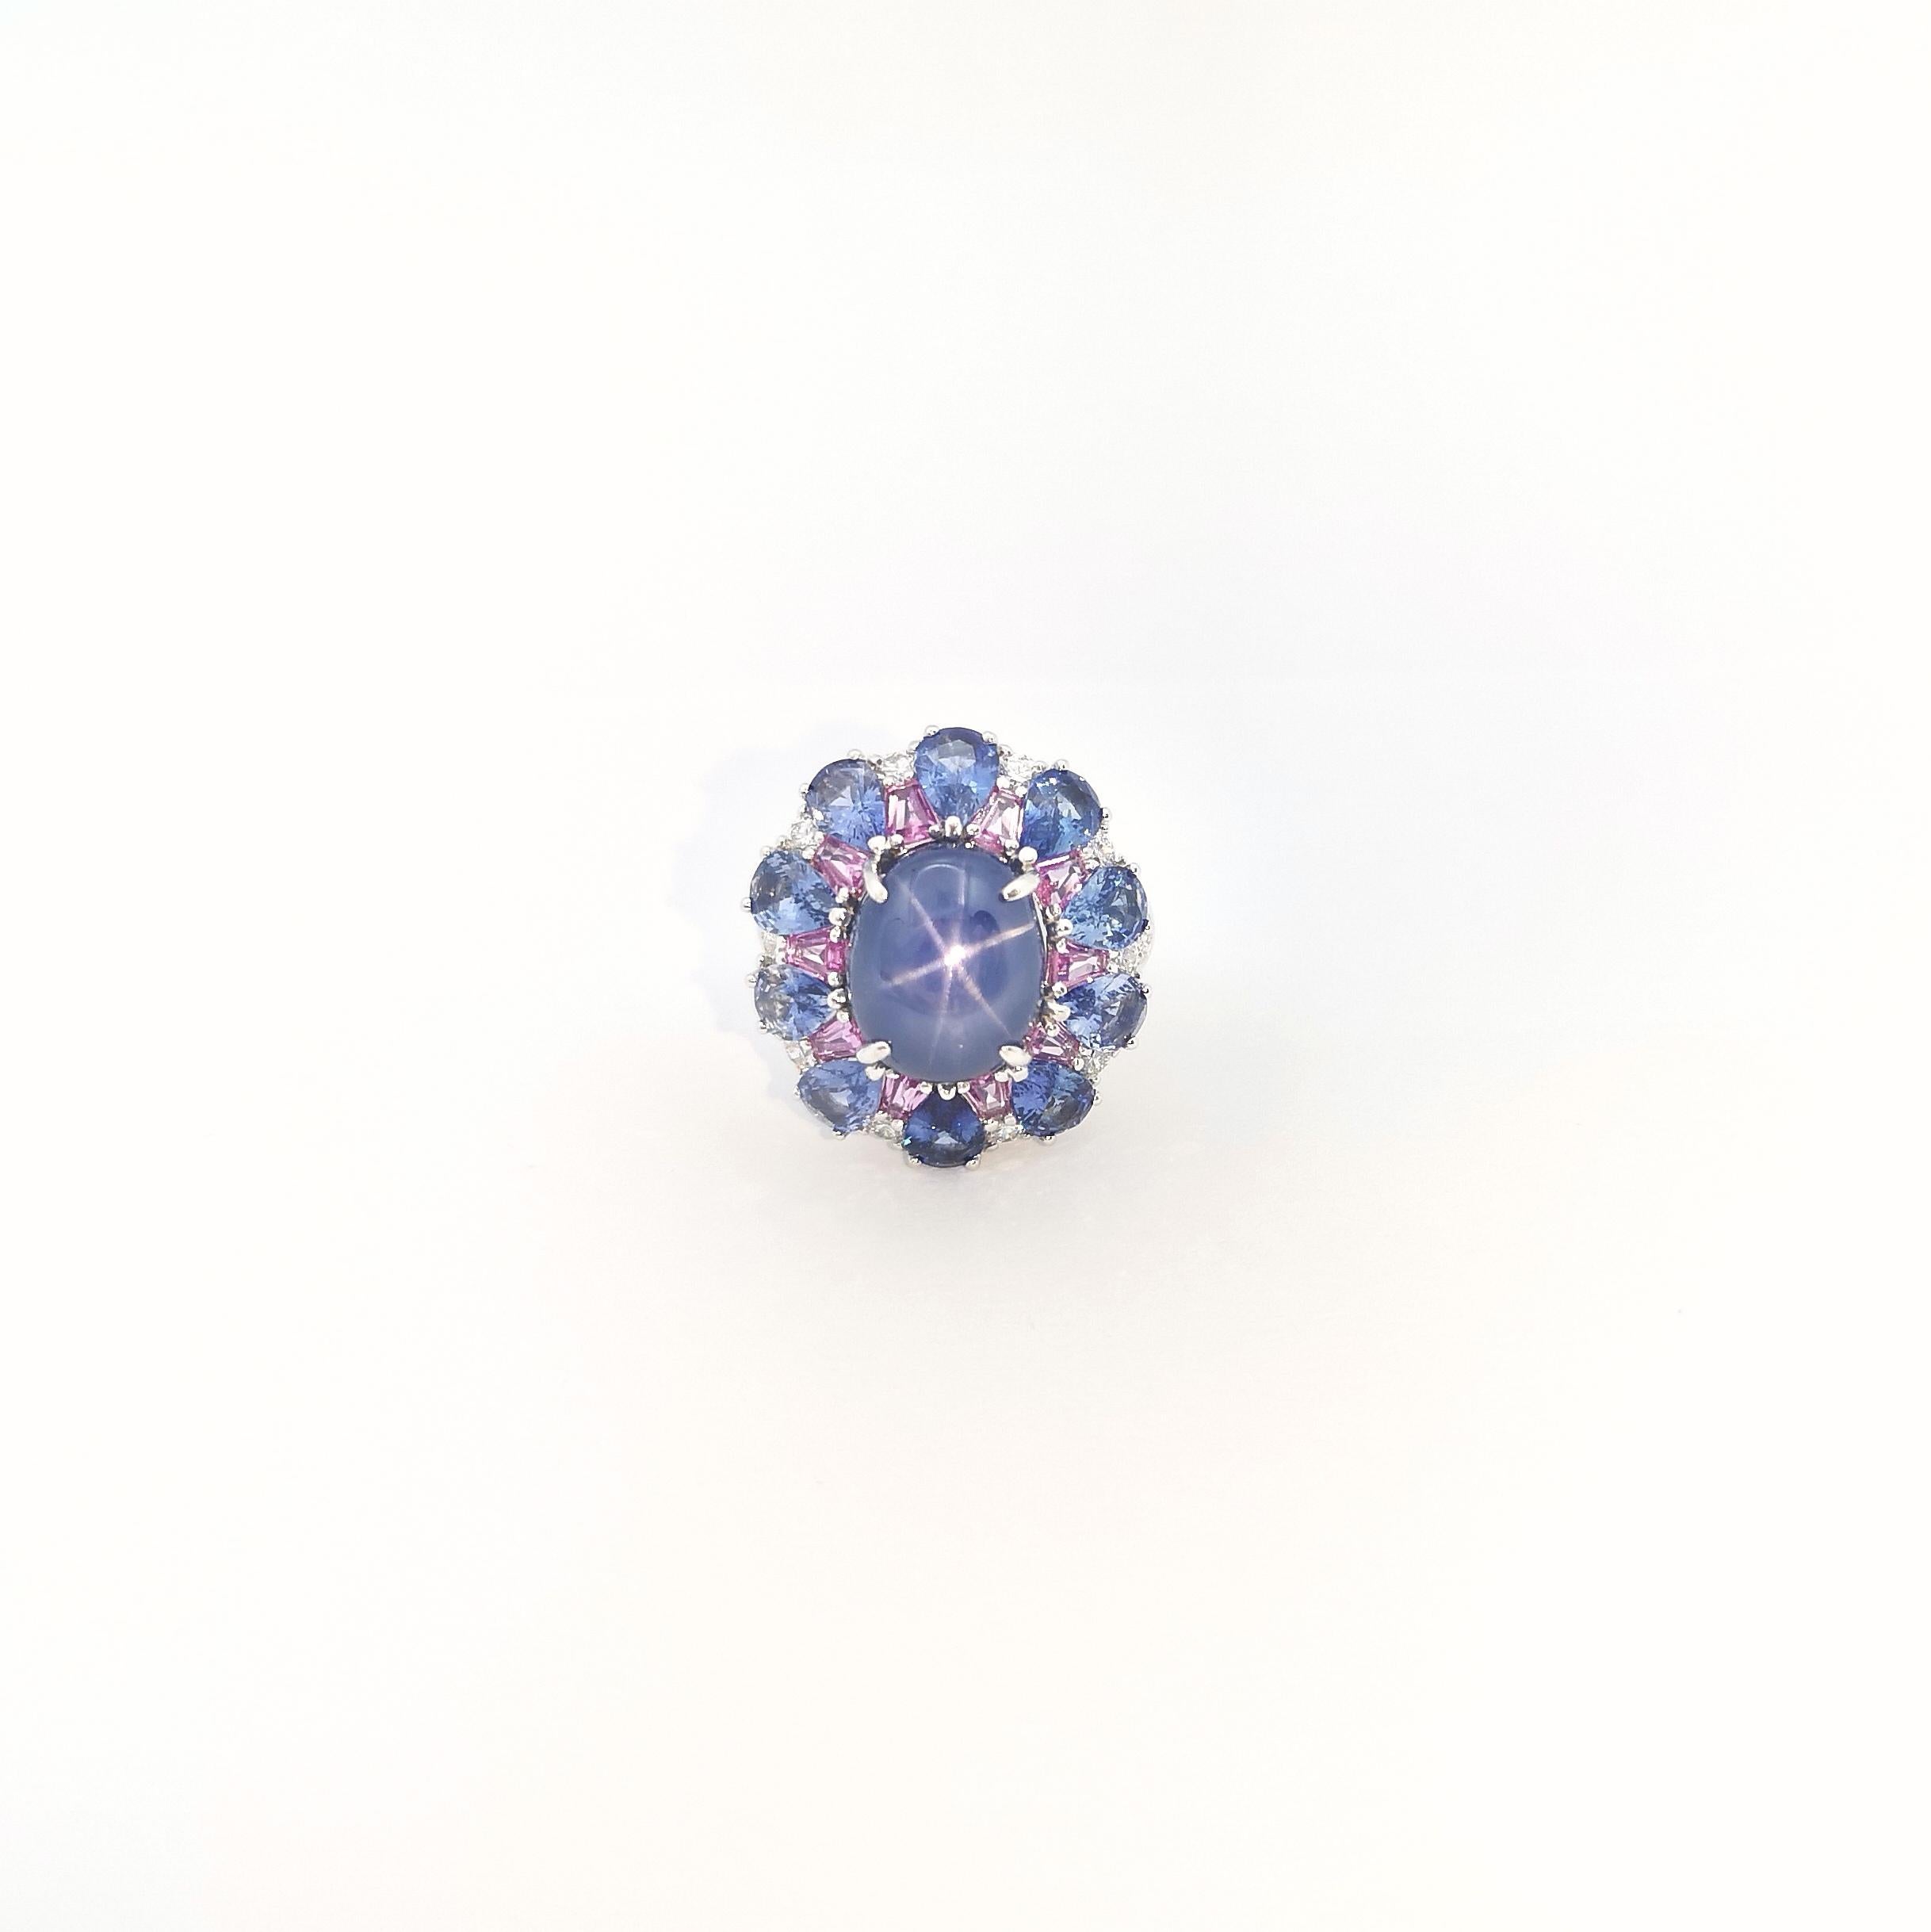 Blue Star Sapphire, Blue Sapphire, Pink Sapphire and Diamond Ring 18K White Gold For Sale 1